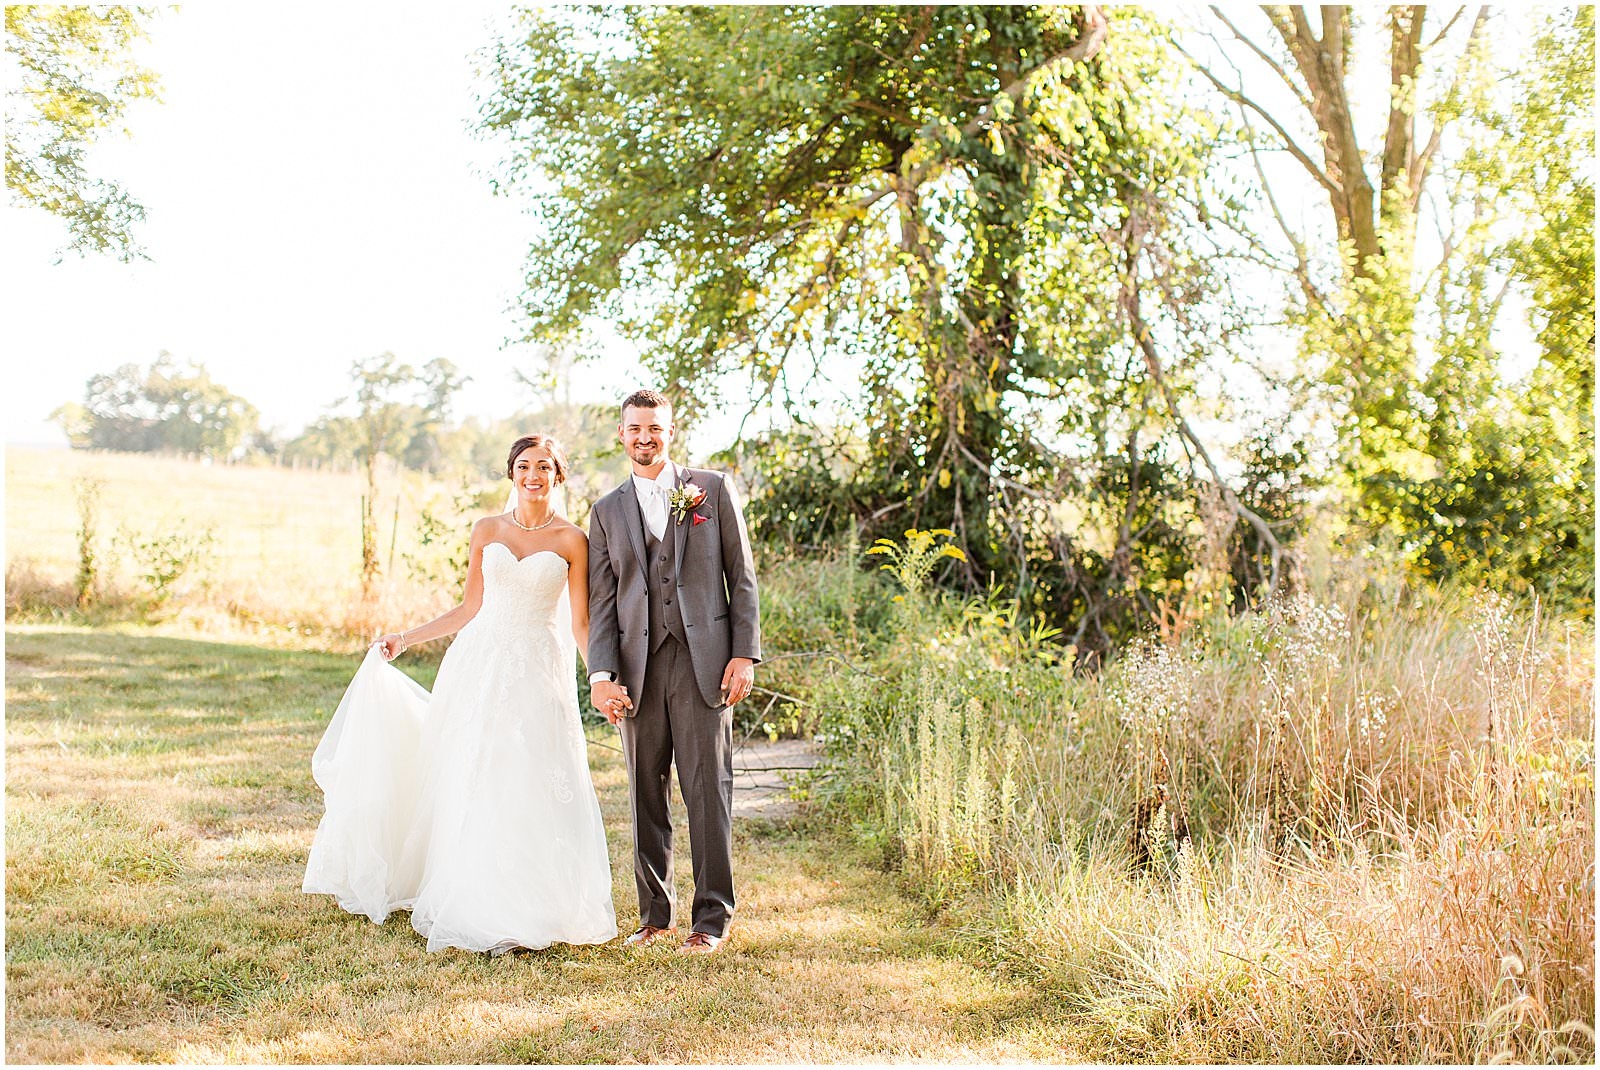 A Stunning Fall Wedding in Indianapolis, IN |. Sally and Andrew | Bret and Brandie Photography 0131.jpg